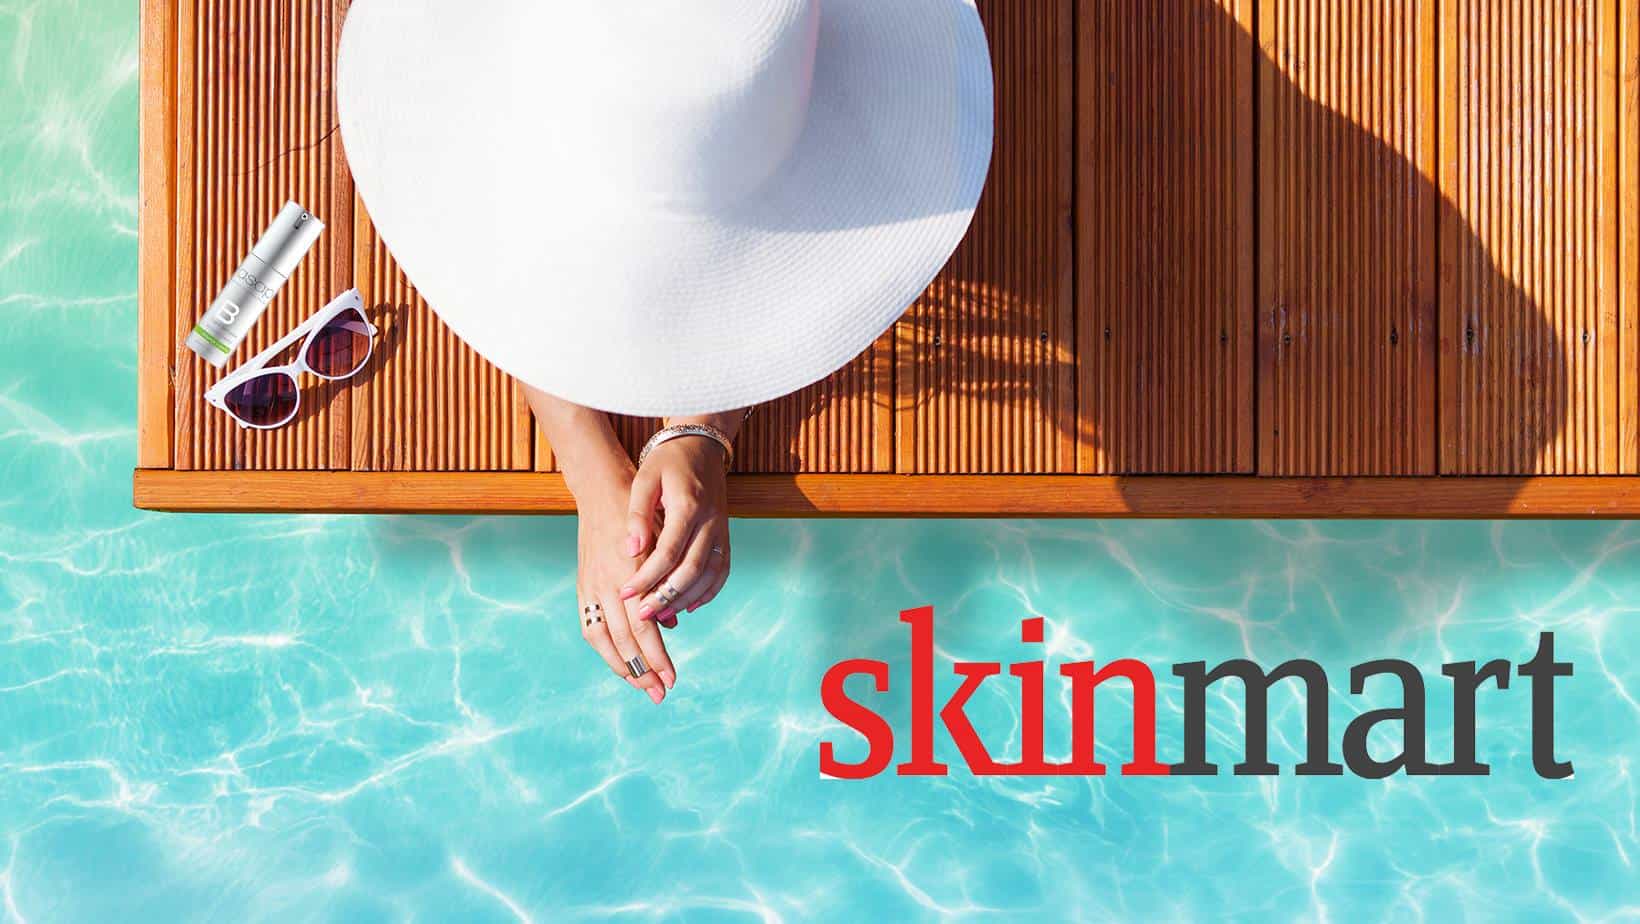 15% OFF your first order when you sign up at Skinmart